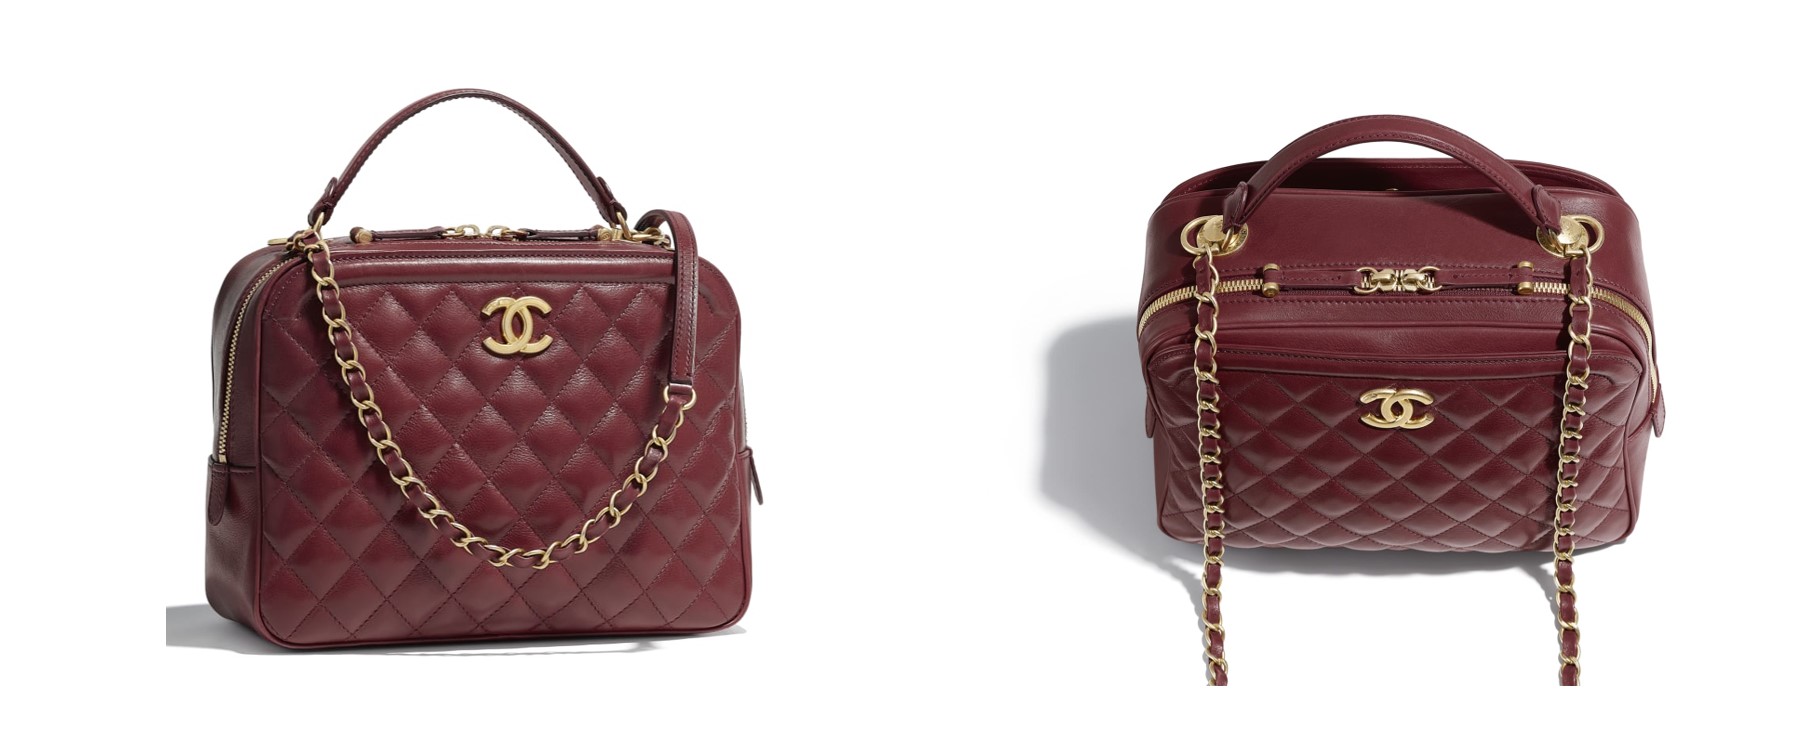 Chanel vanity case burgundy new collection fall winter 2018